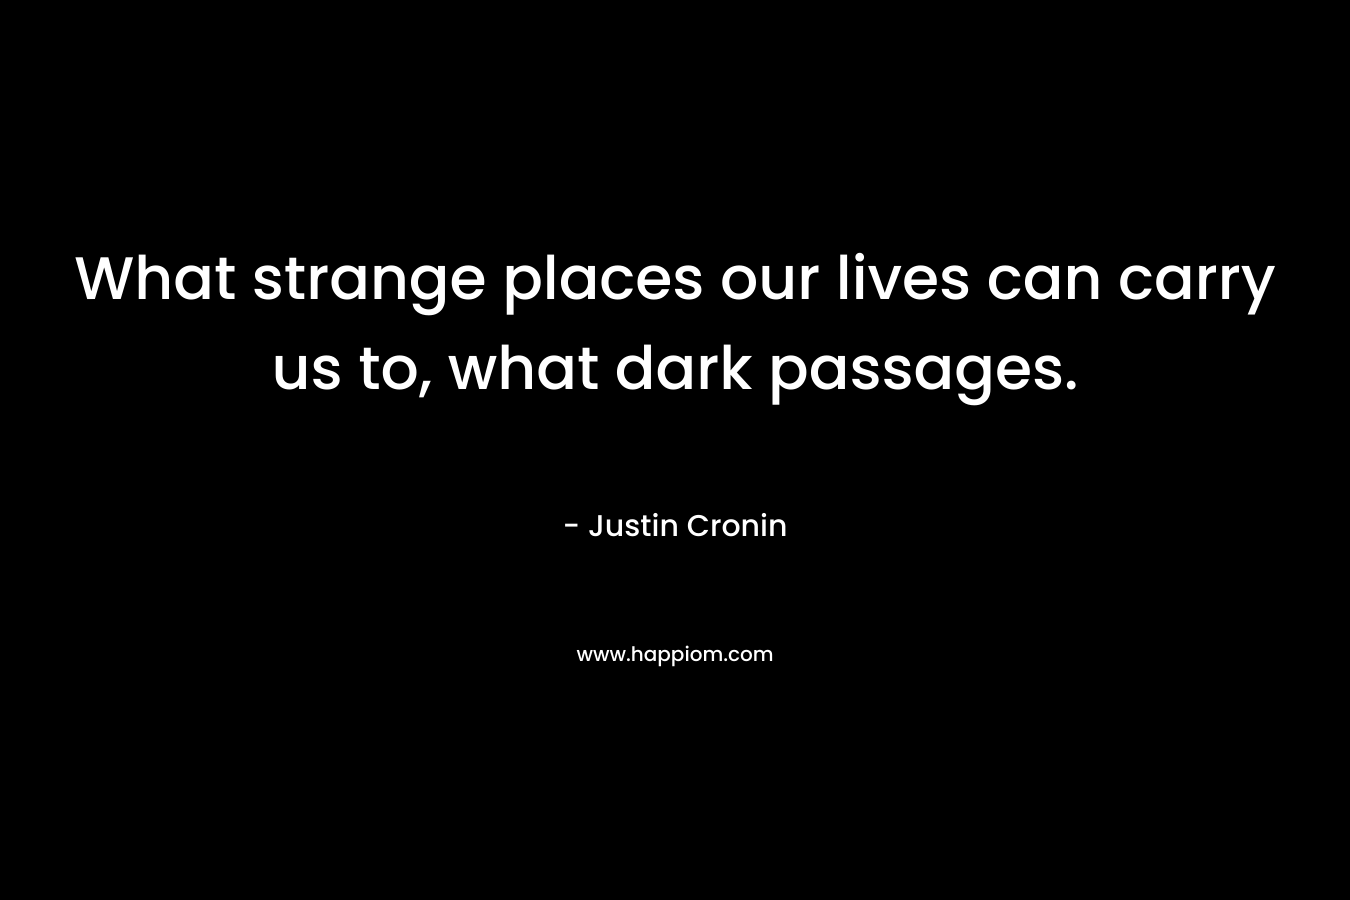 What strange places our lives can carry us to, what dark passages. – Justin Cronin